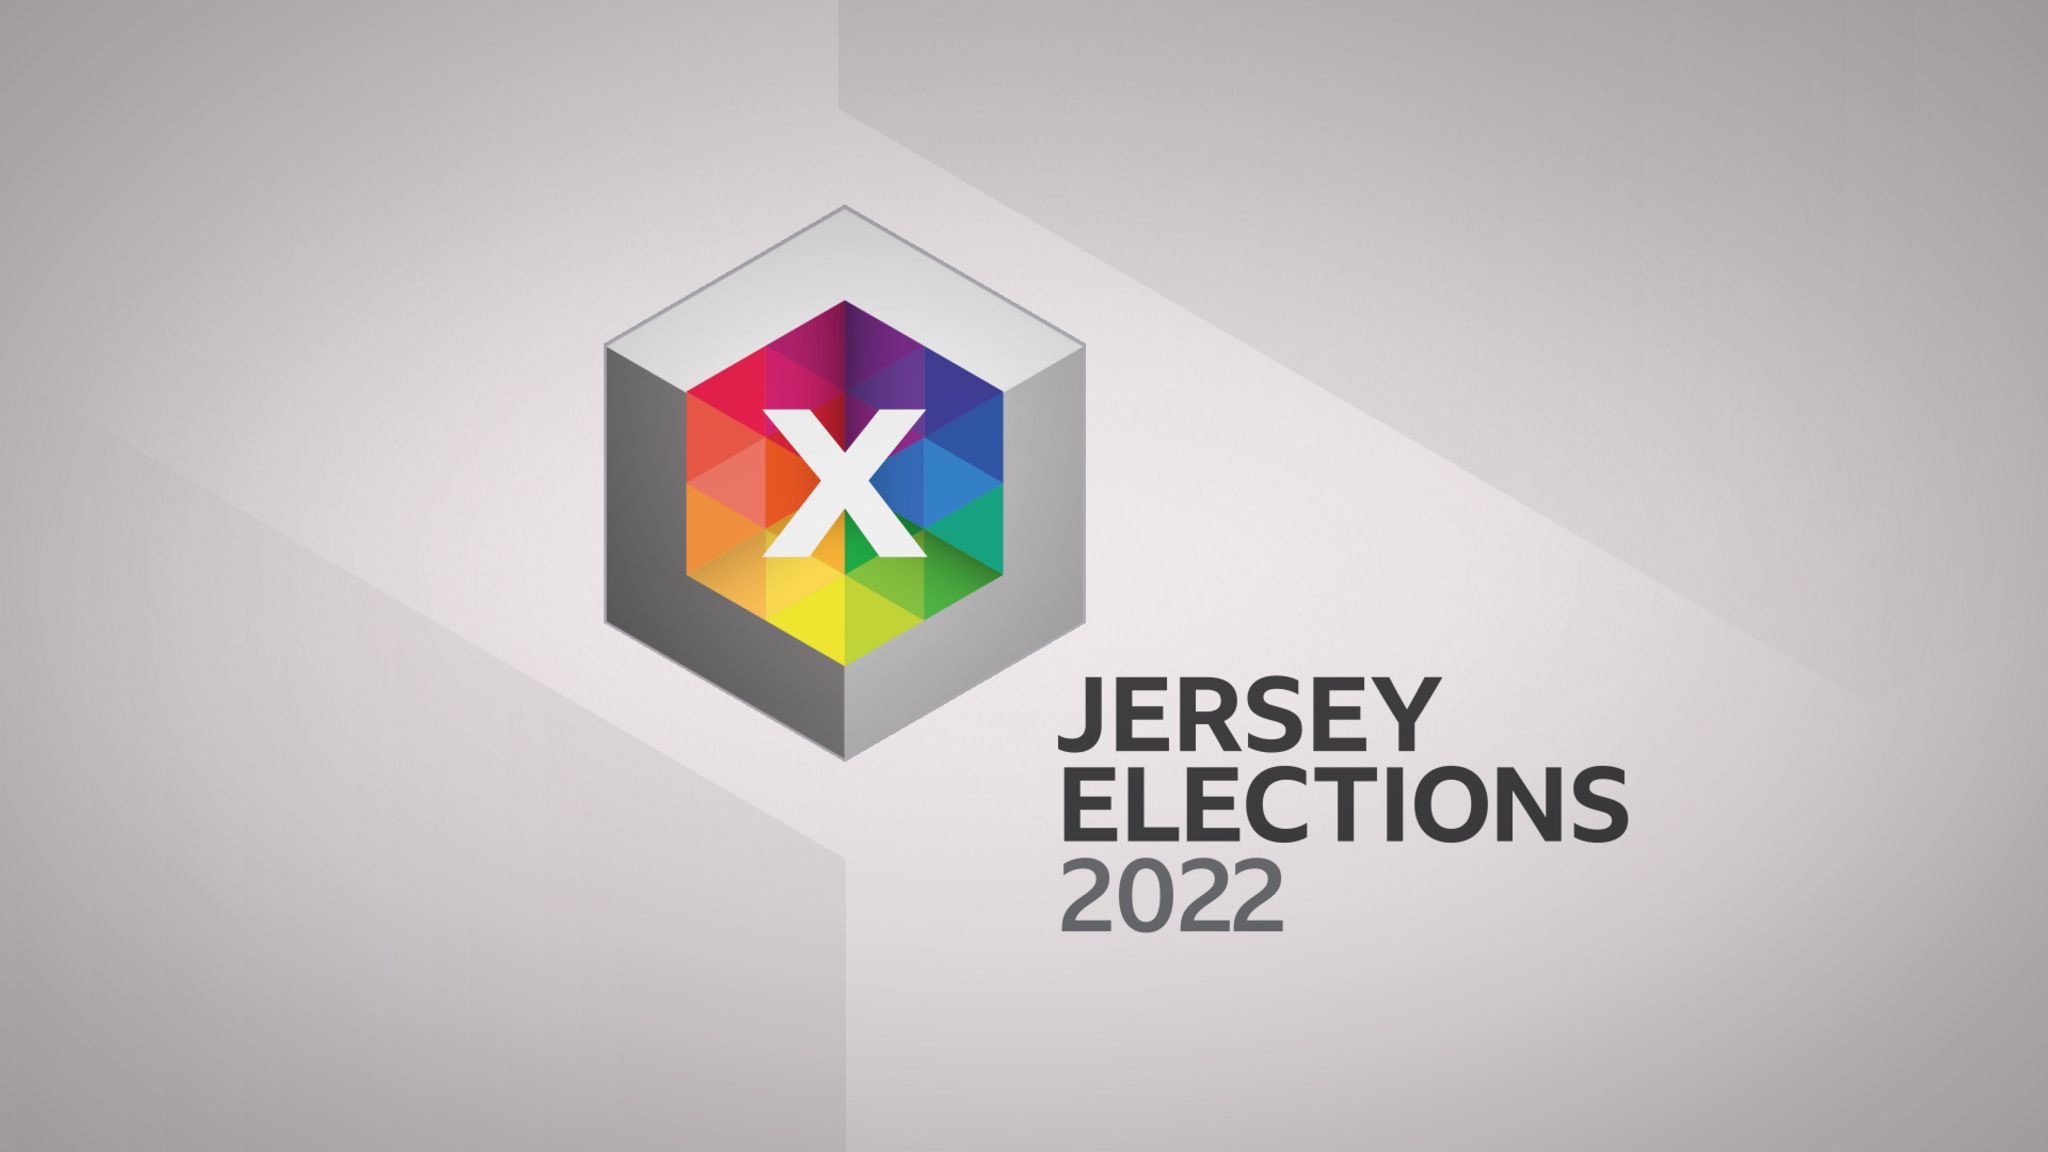 Jersey Election 2022